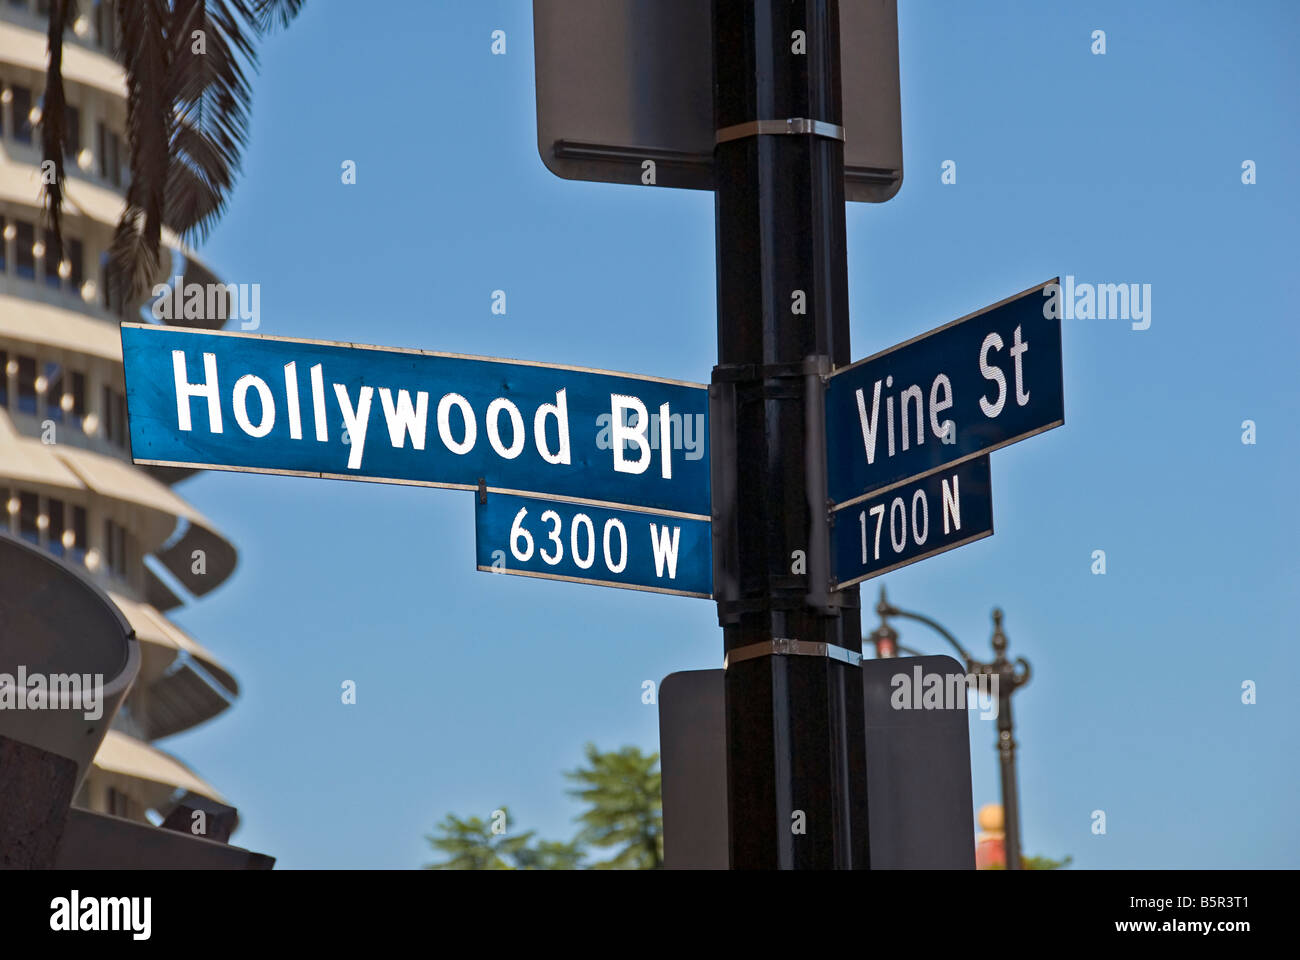 Hollywood and Vine Street sign Hollywood Blvd. Los Angeles CA California  USA clear day blue sky Stock Photo - Alamy